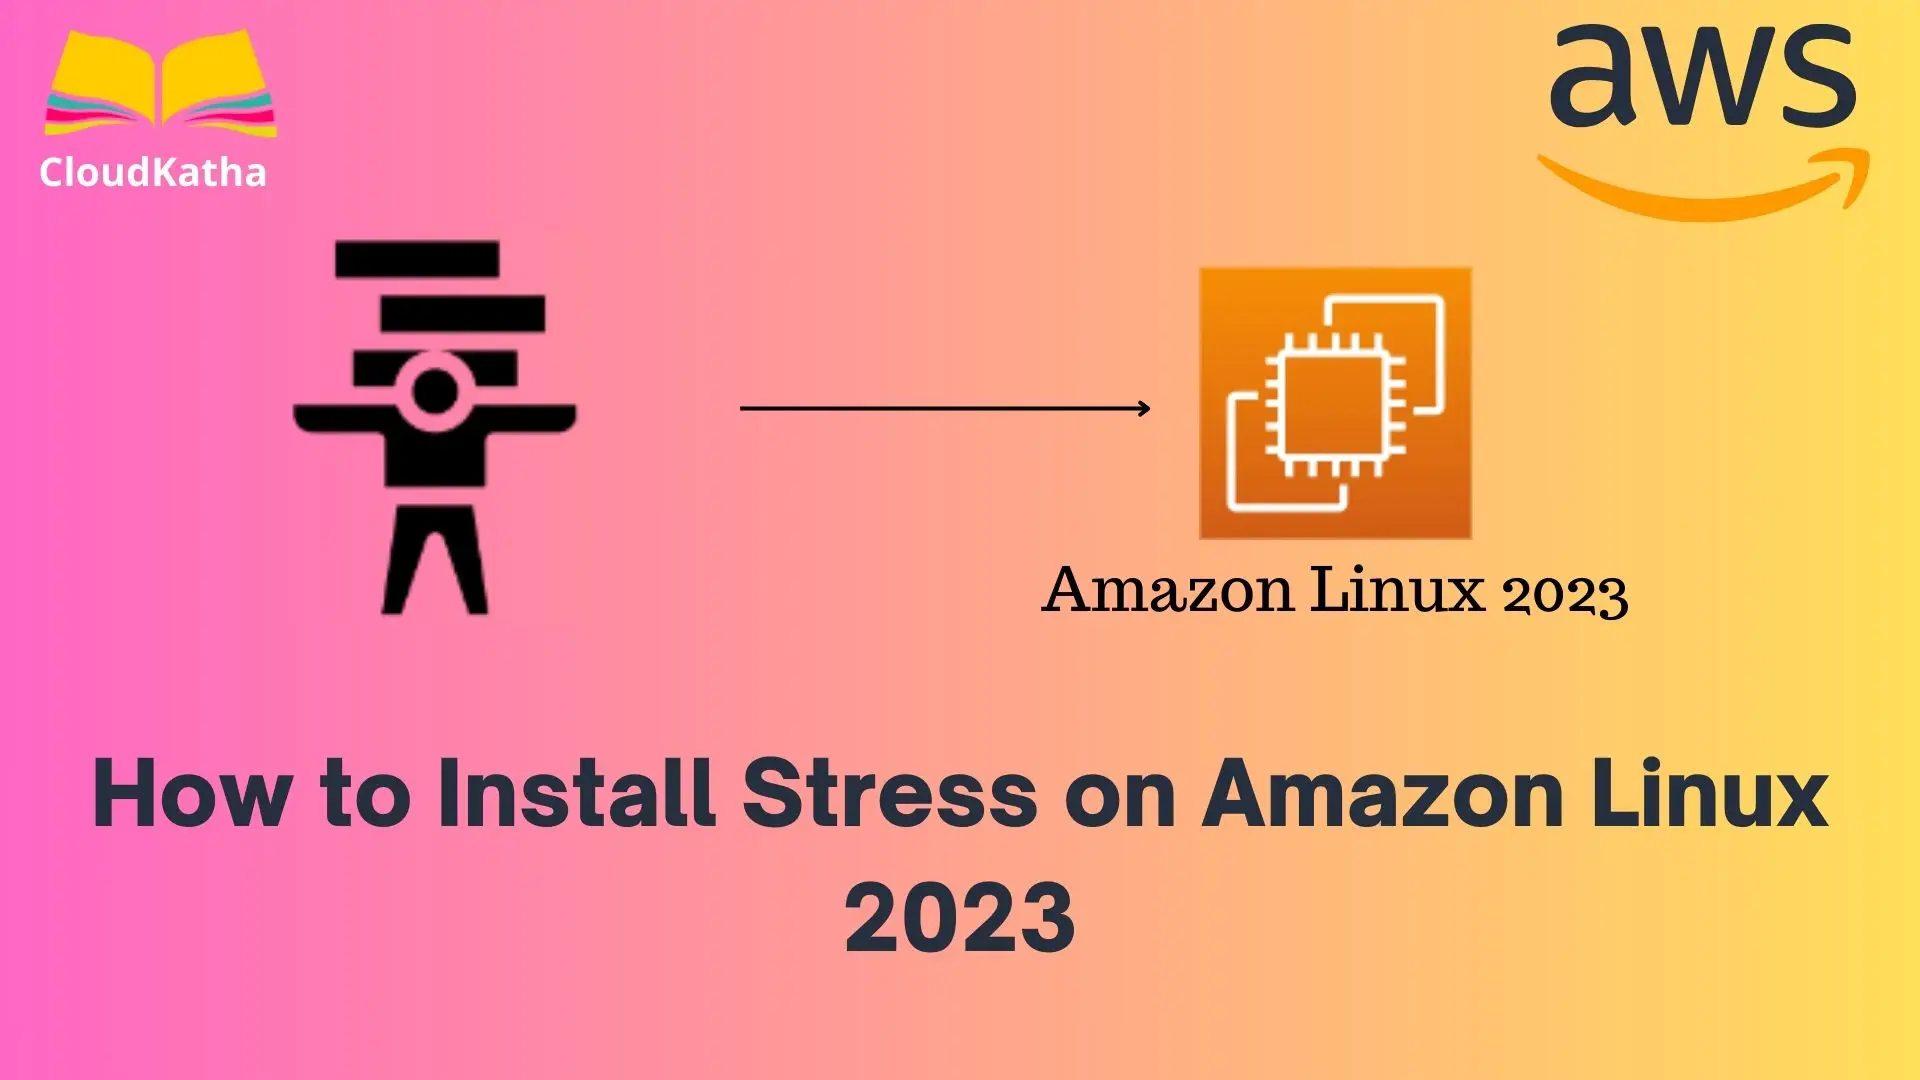 How to Install Stress on Amazon Linux 2023